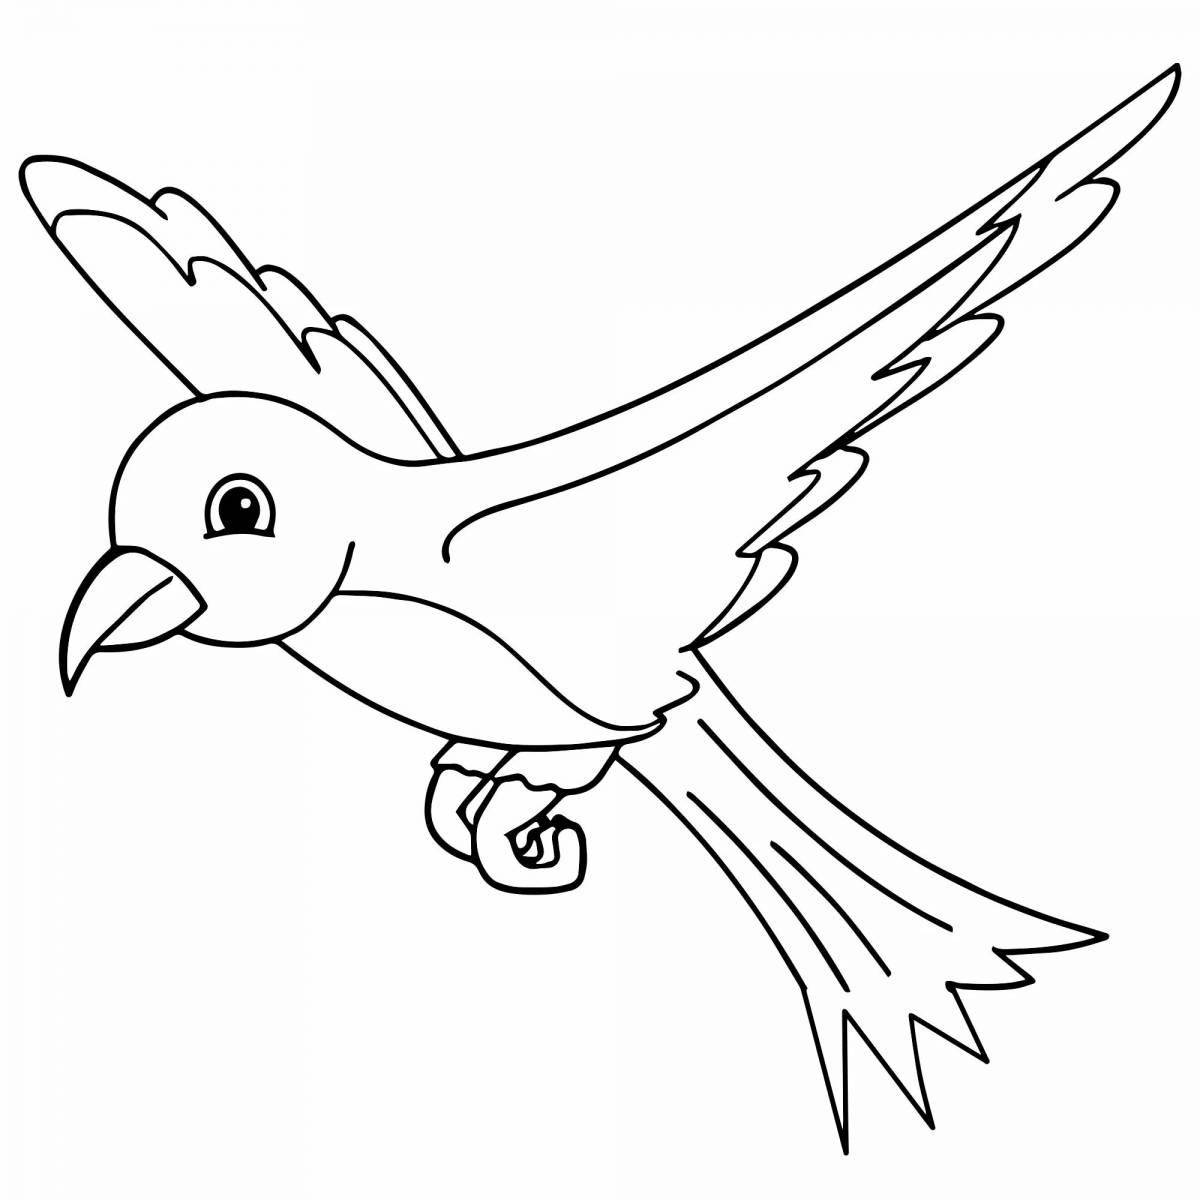 Coloured Magpie for 3-4 year olds